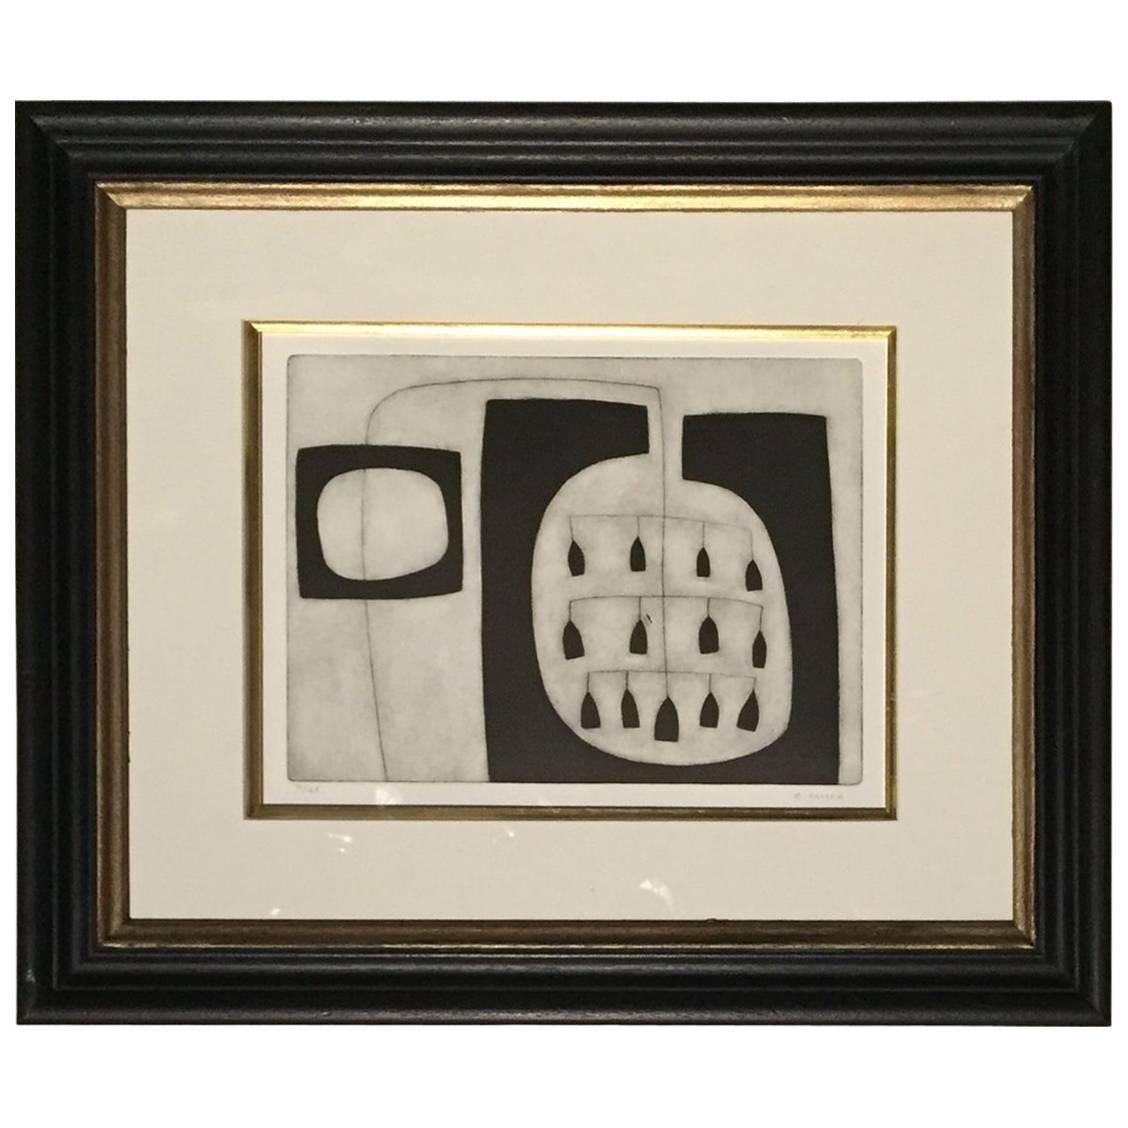 Abstract Black and White Etching by English Artist Oliver Gaiger, Contemporary